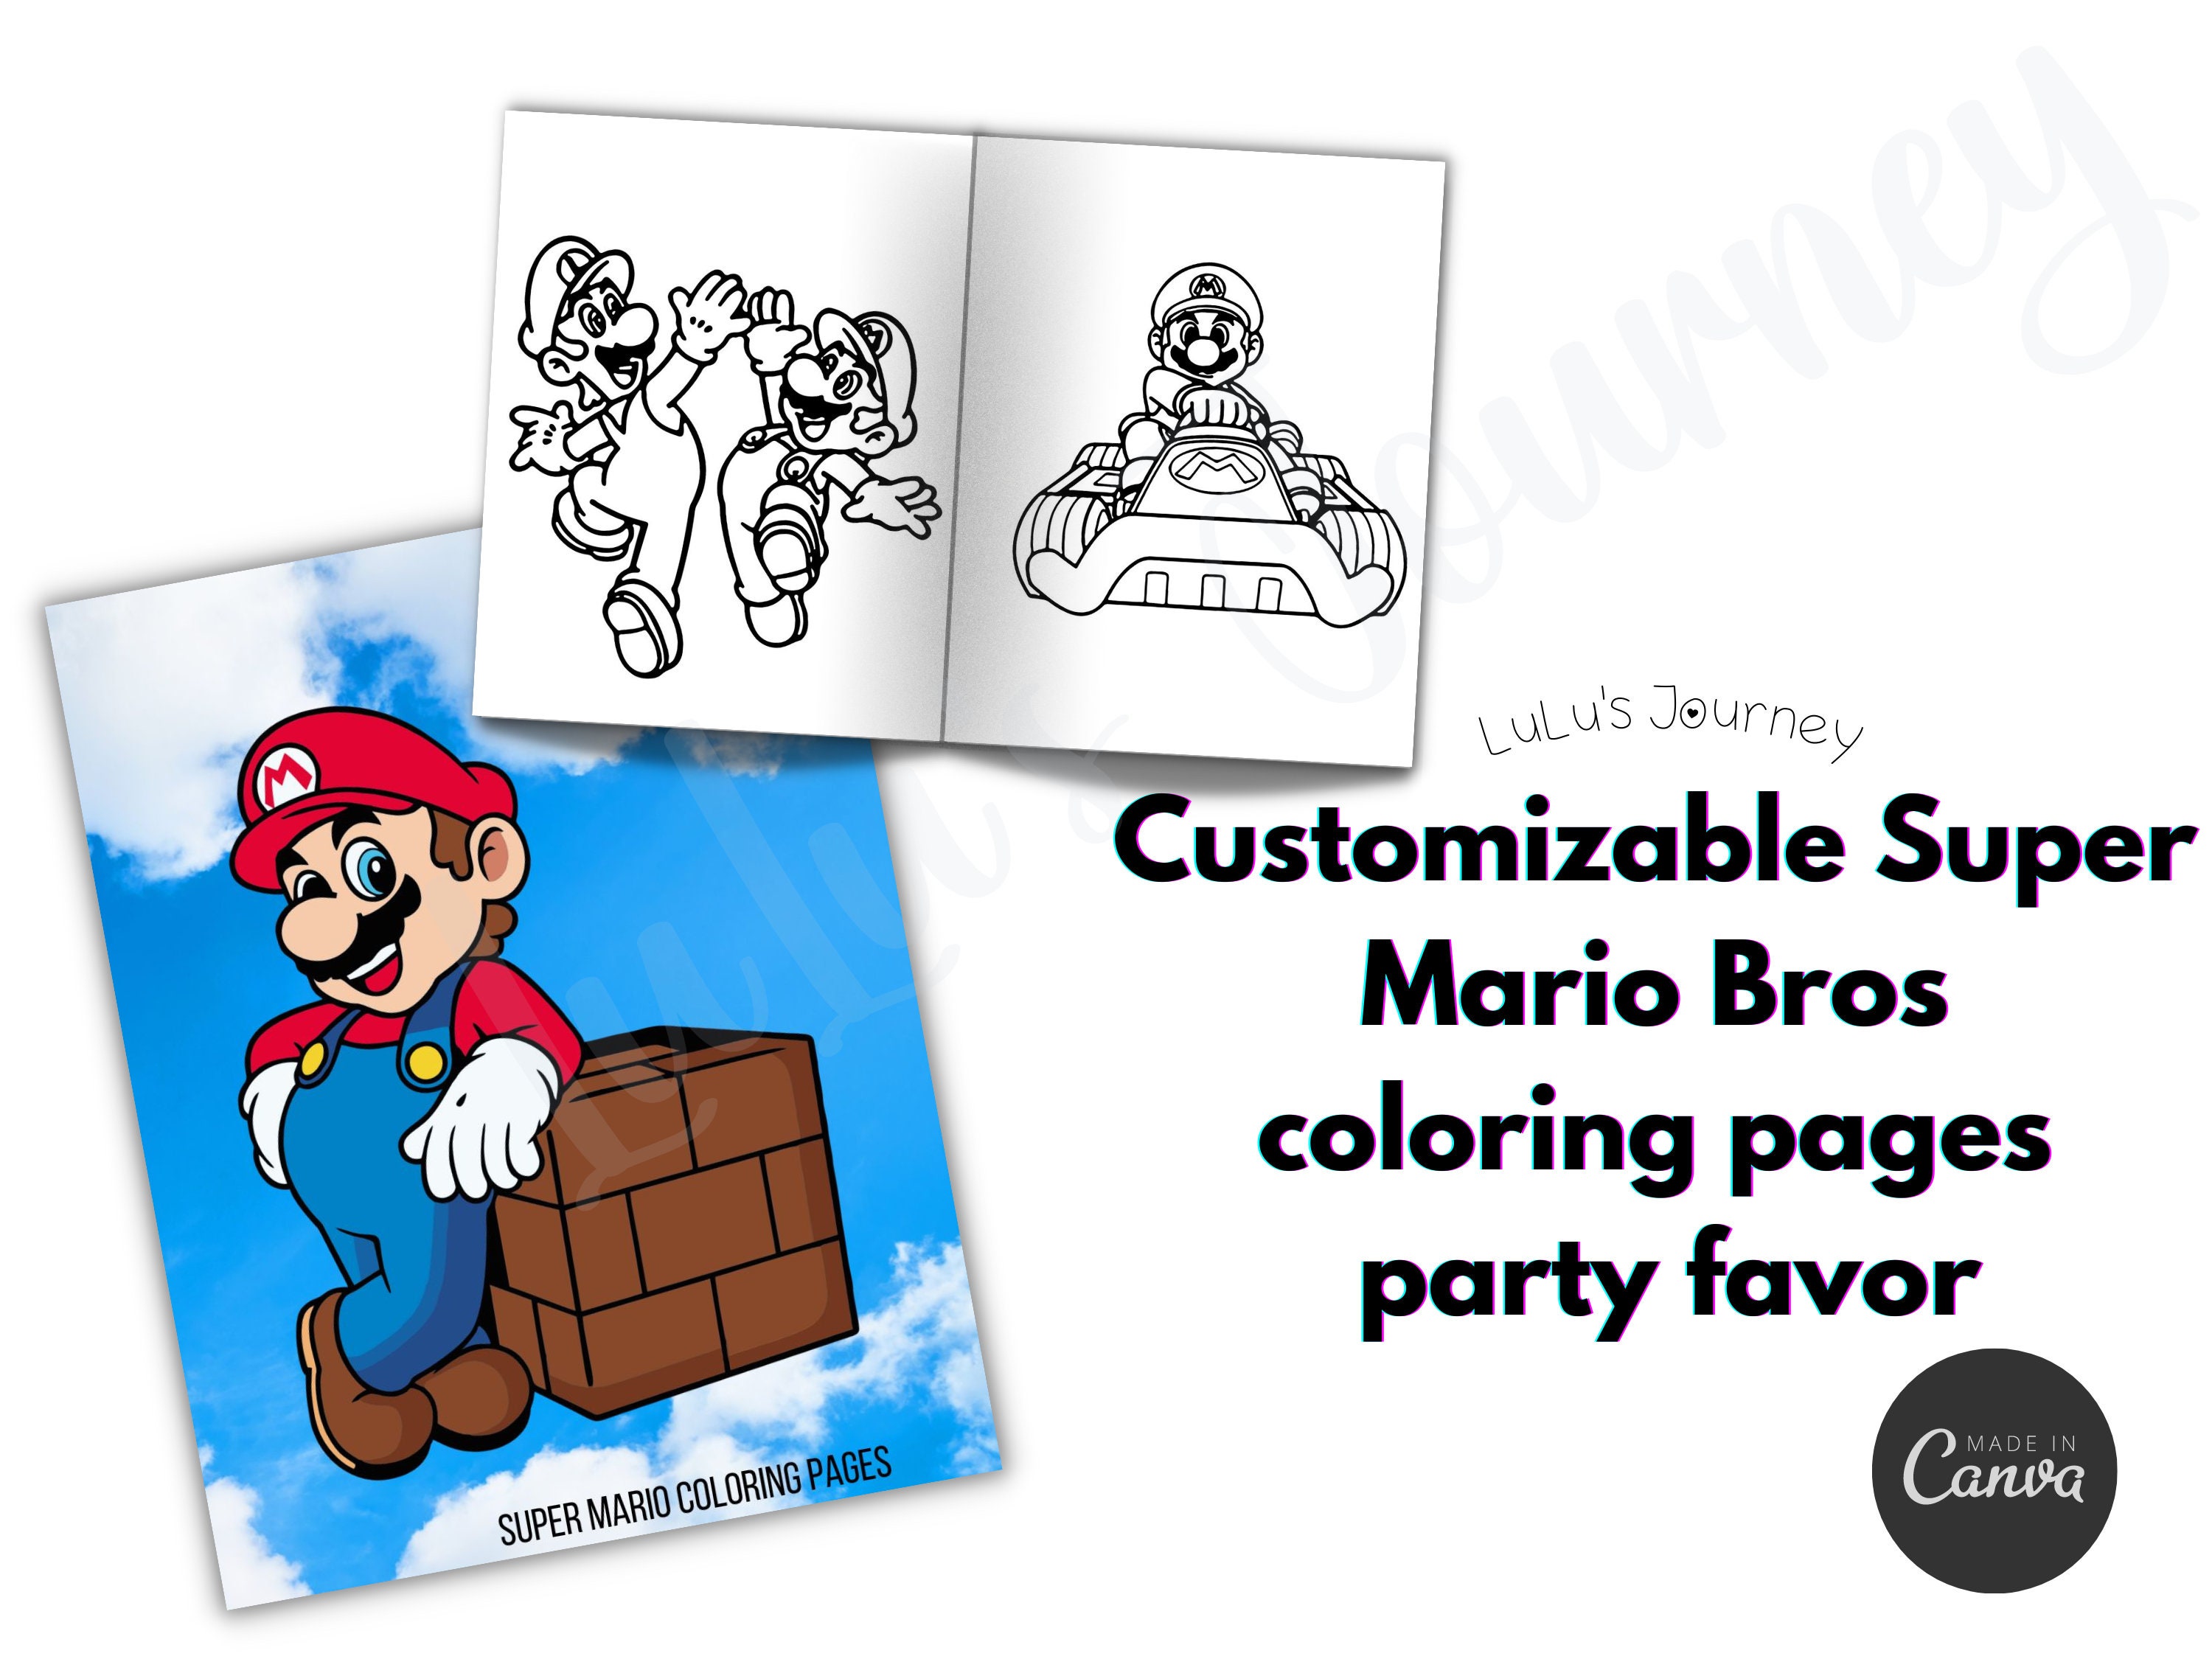 Bowser Coloring Pages - Best Coloring Pages For Kids  Super mario coloring  pages, Mario coloring pages, Castle coloring page